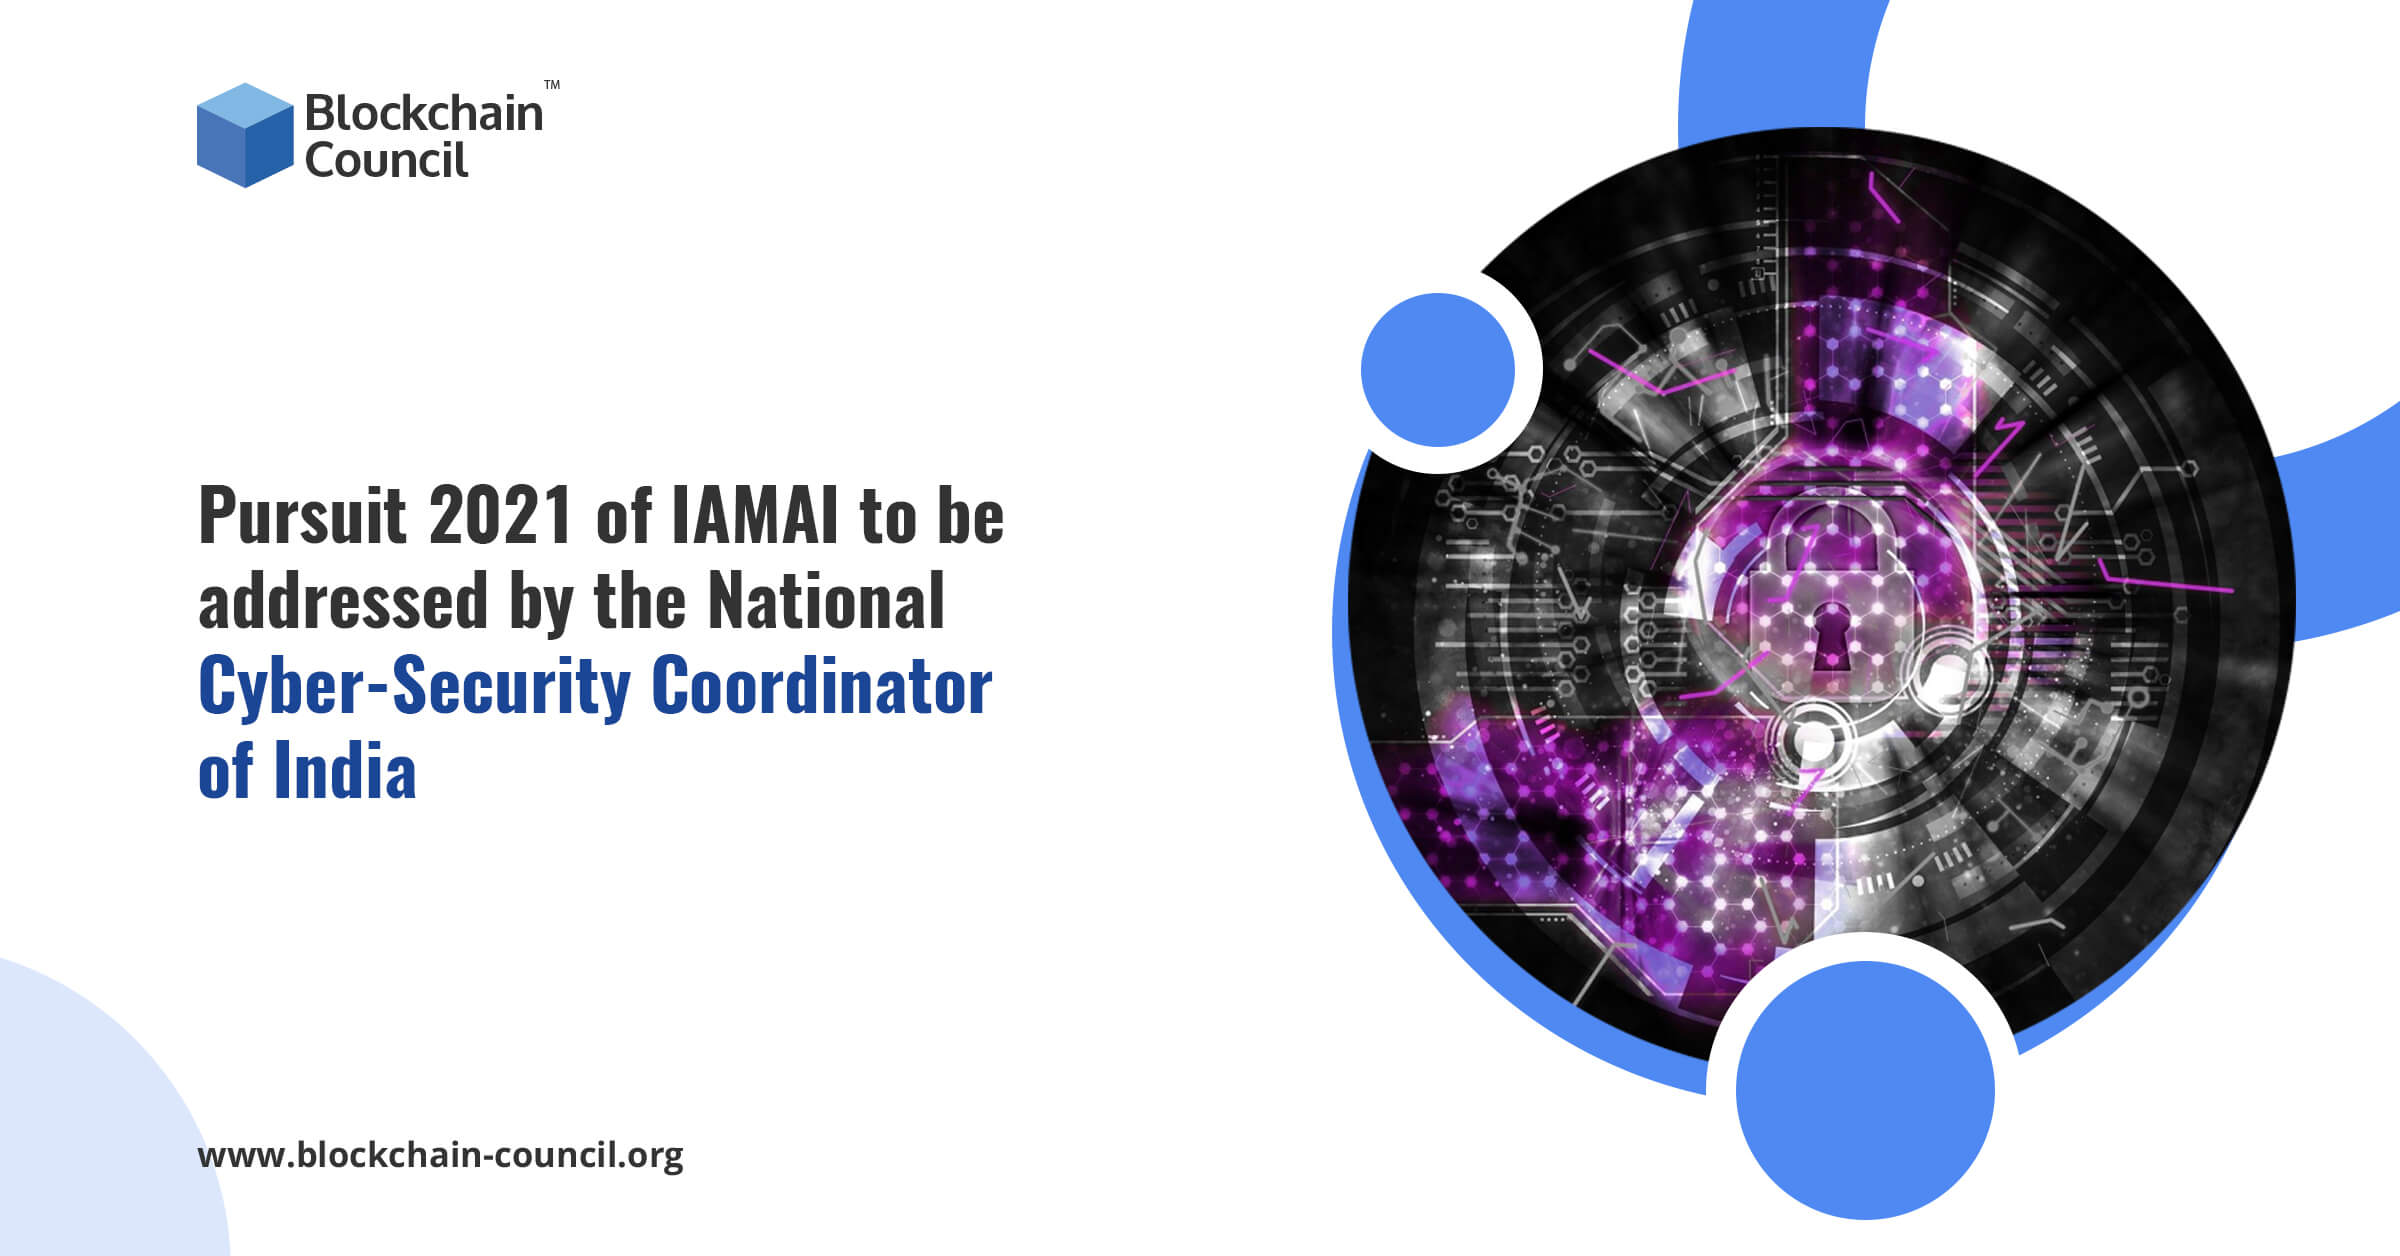 Pursuit 2021 of IAMAI to be addressed by the National Cyber-Security Coordinator of India